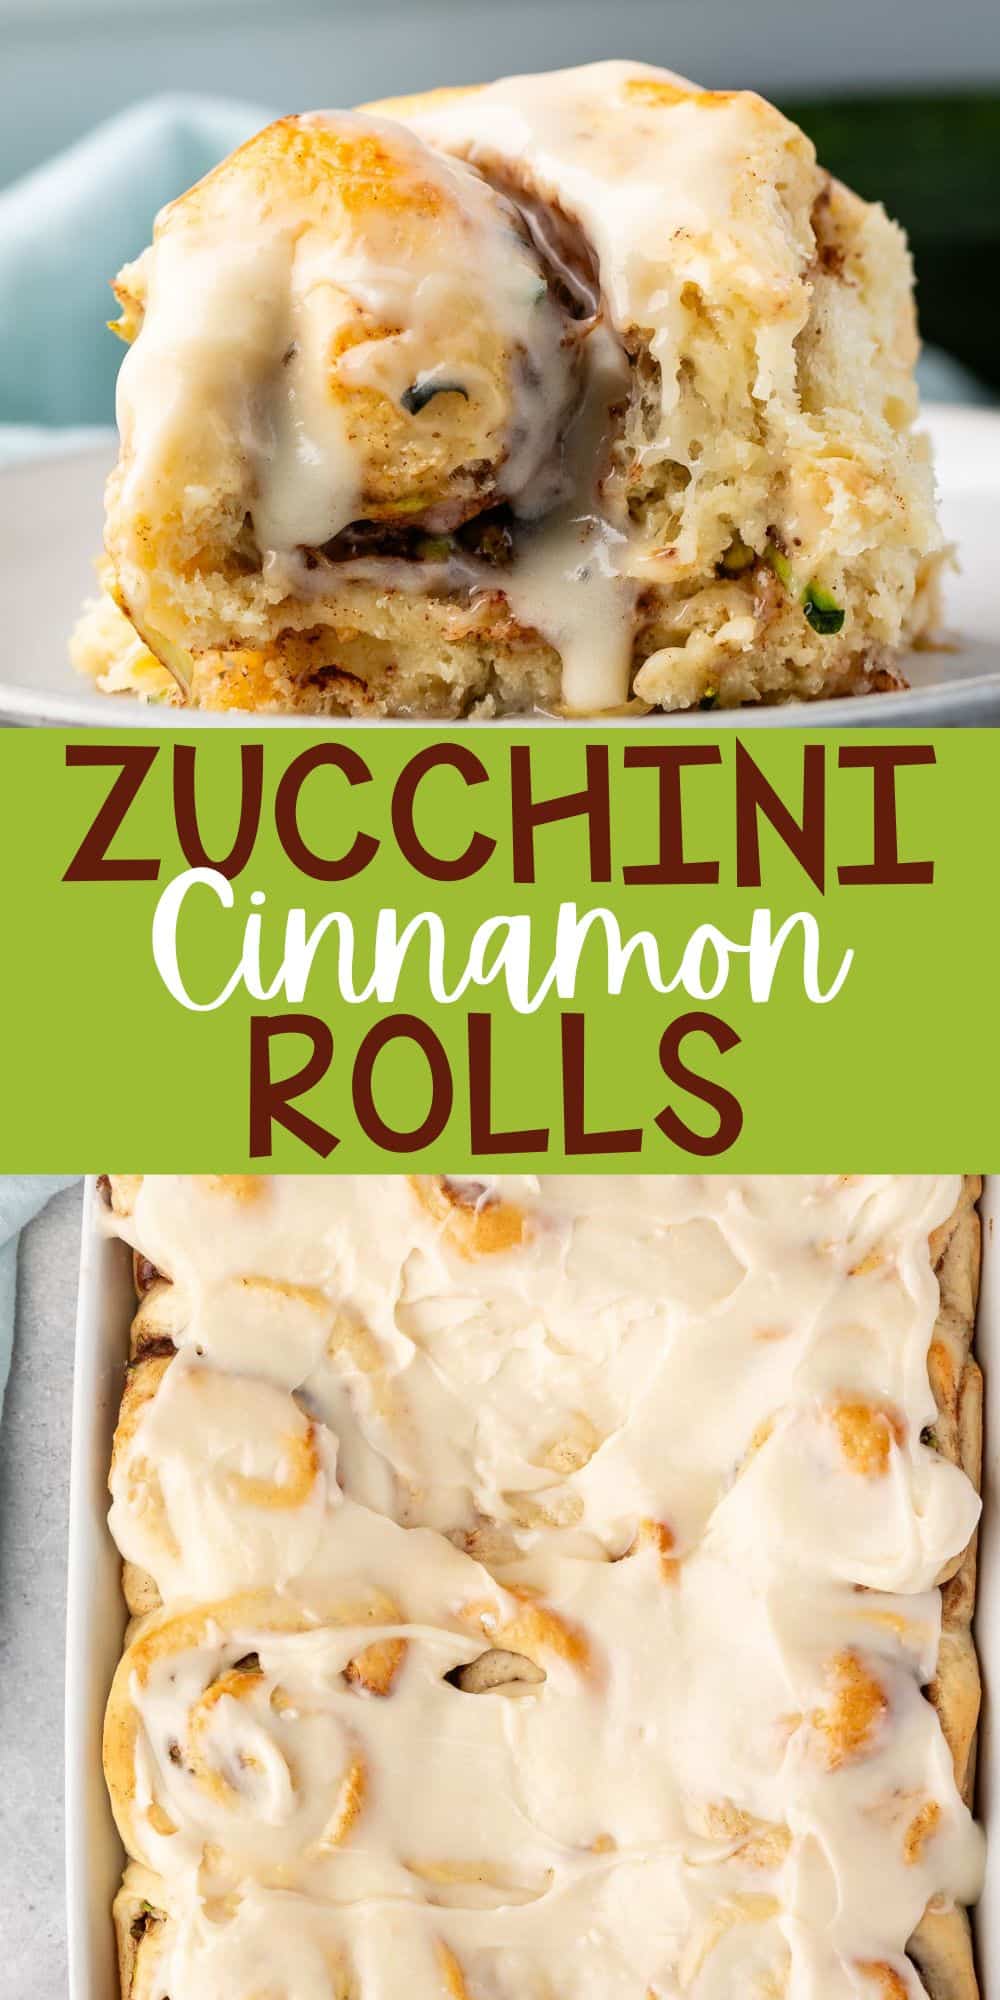 two photos of zucchini cinnamon rolls in a white pan covered in frosting with words on the image.